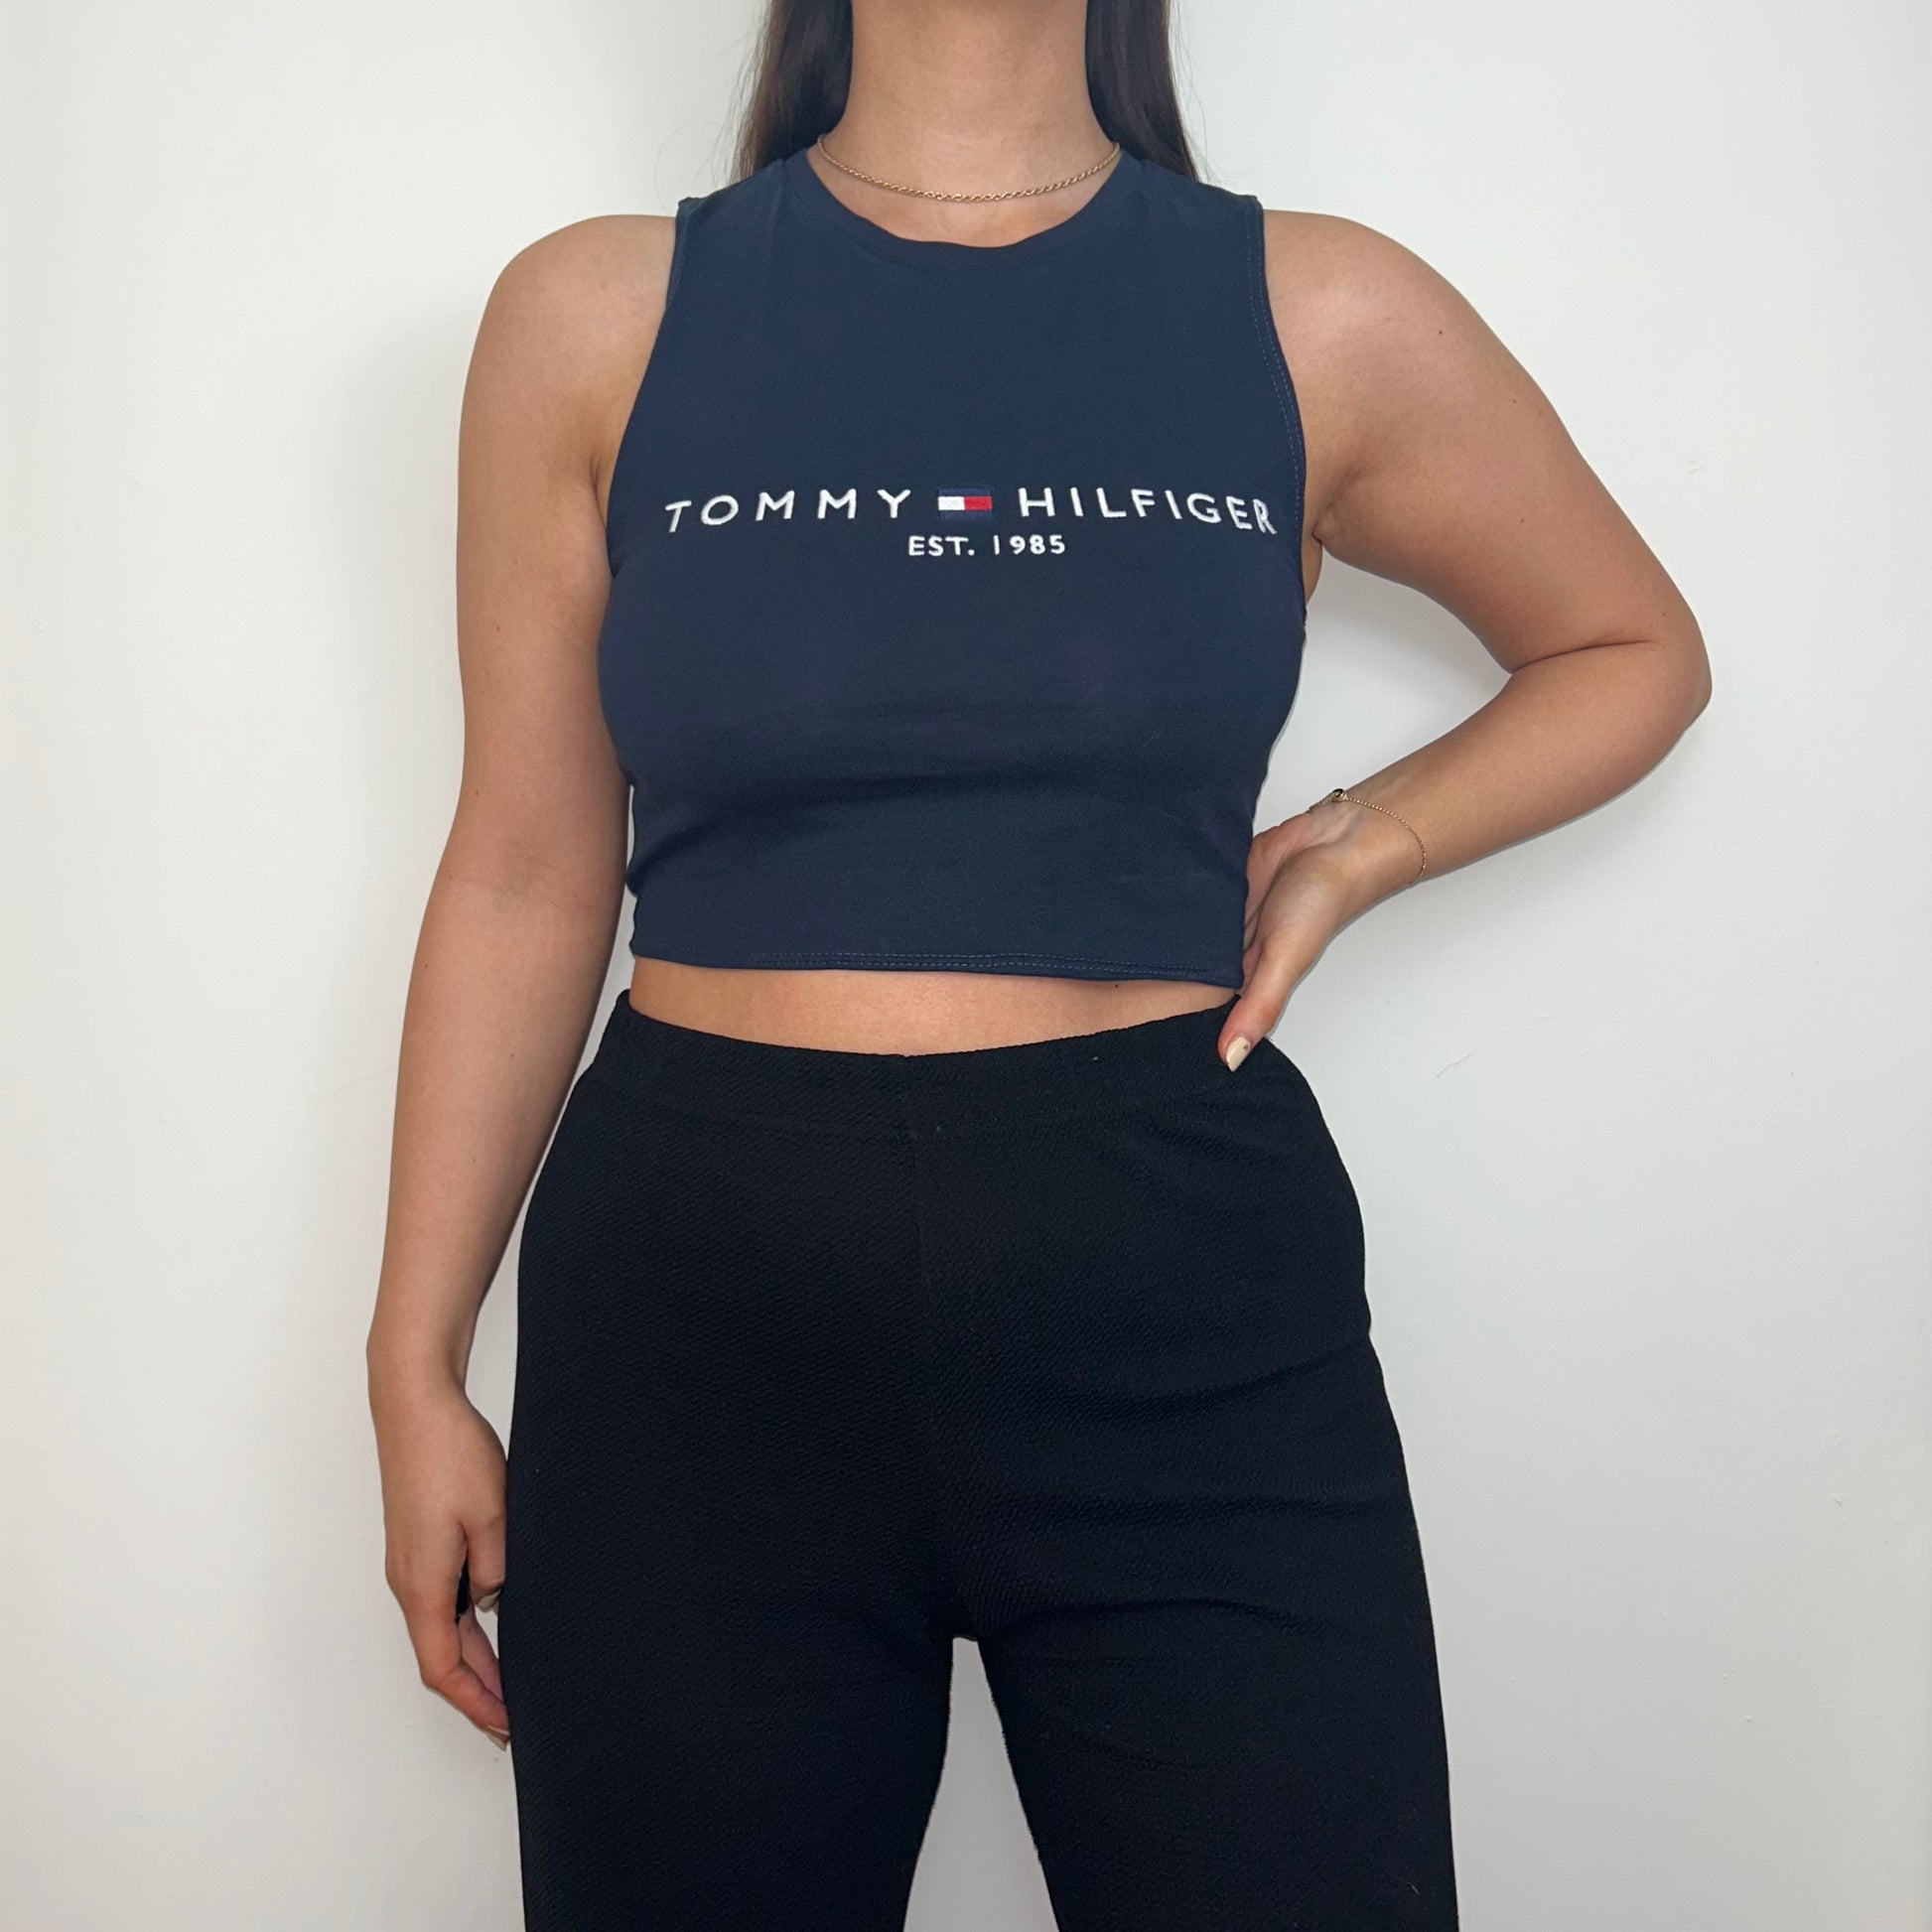 navy sleeveless crop top with white tommy hilfiger logo shown on a model wearing black trousers